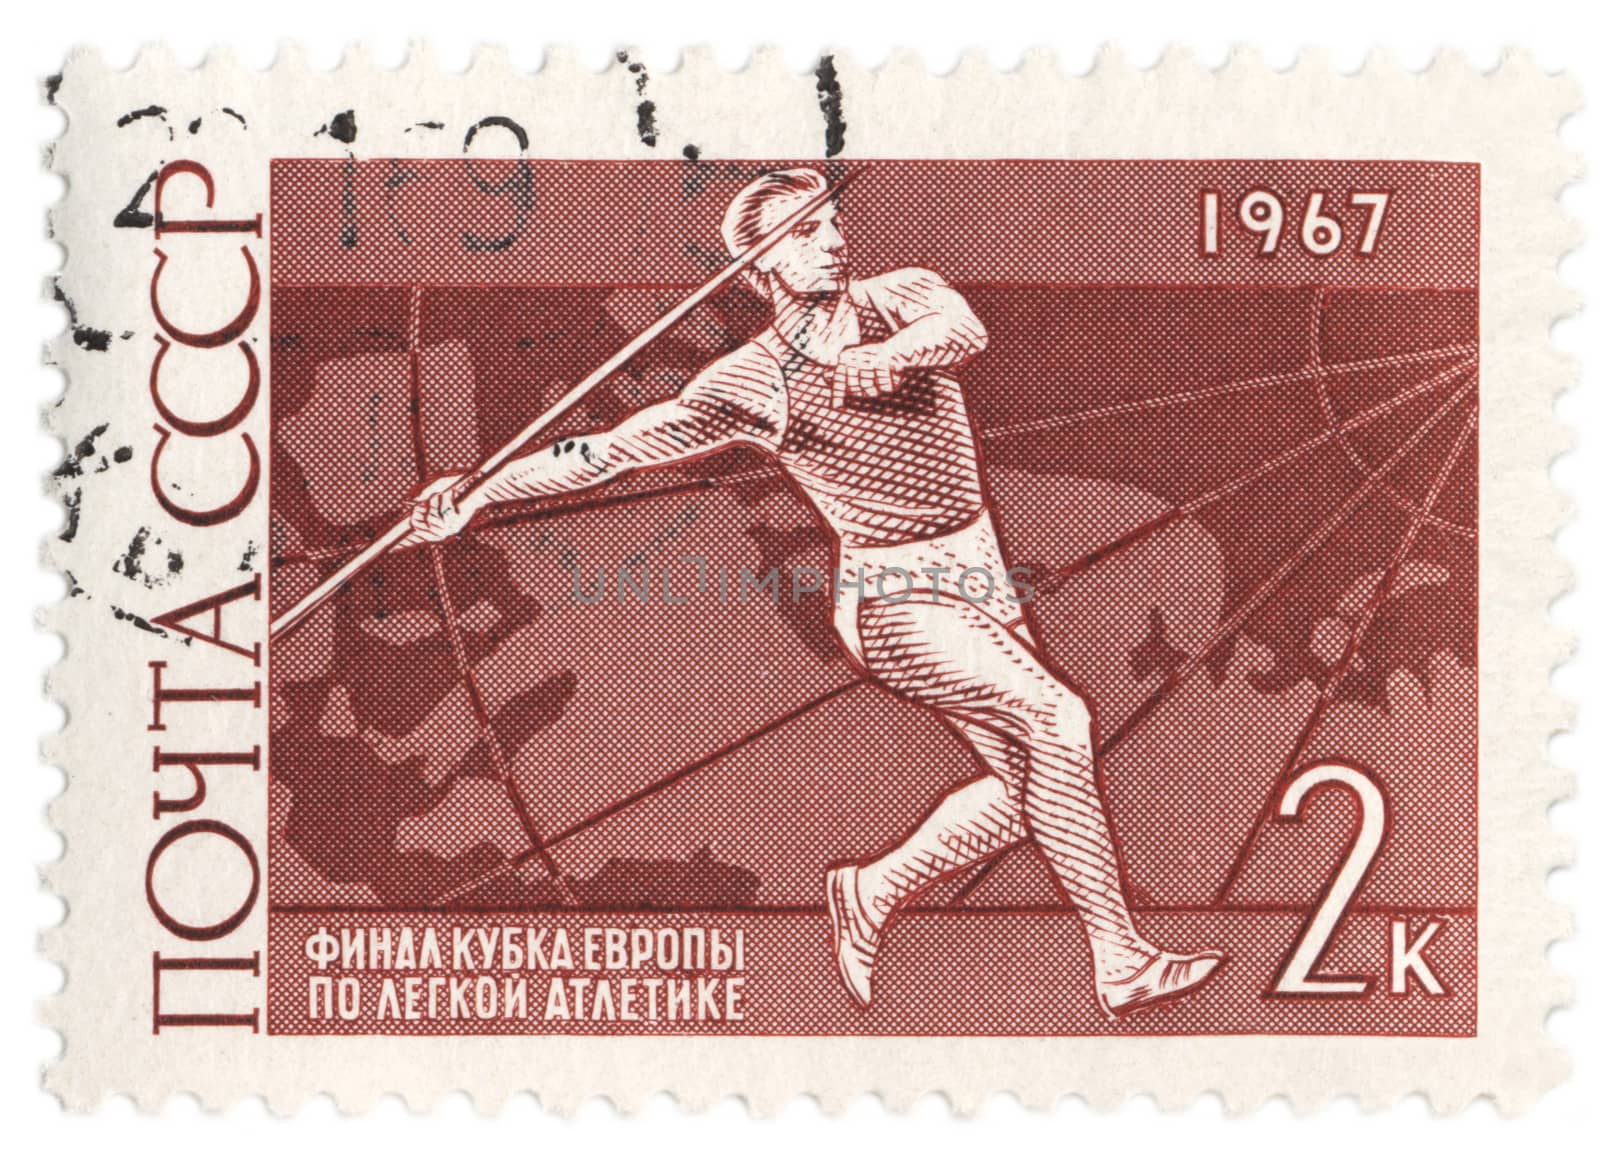 Javelin thrower on post stamp by wander